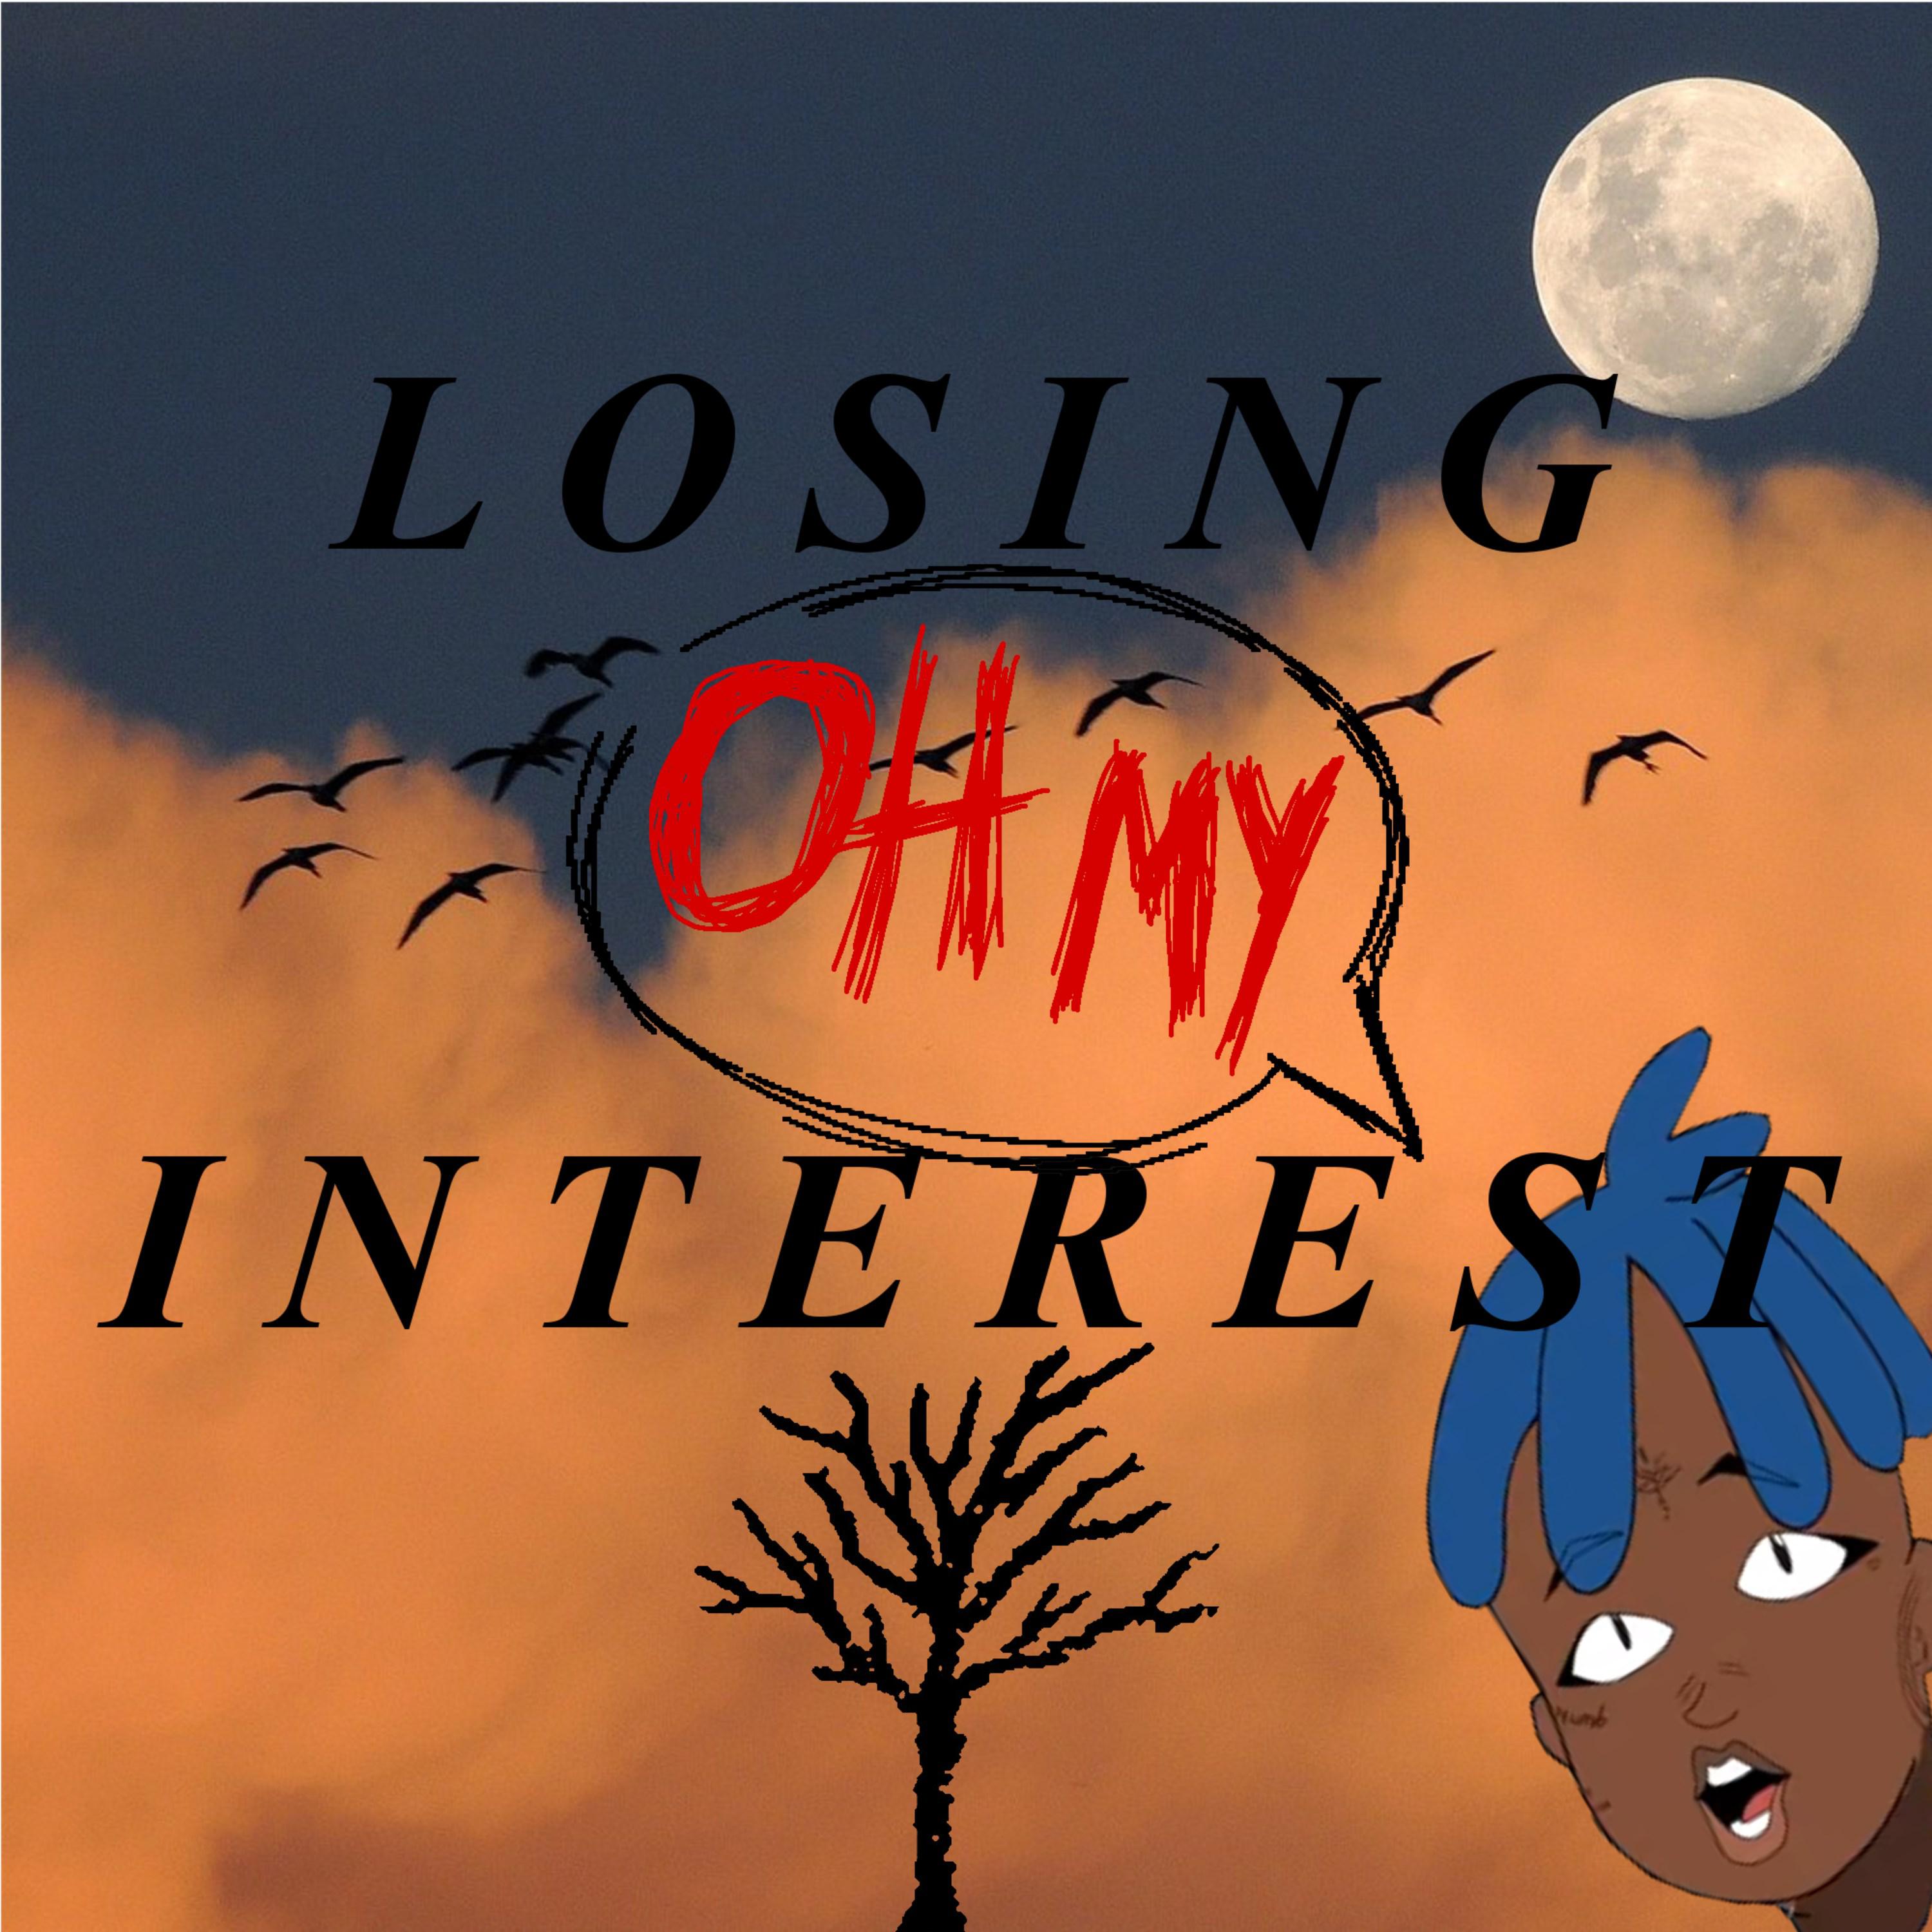 losing oh my interest - shiloh dynasty/tabow